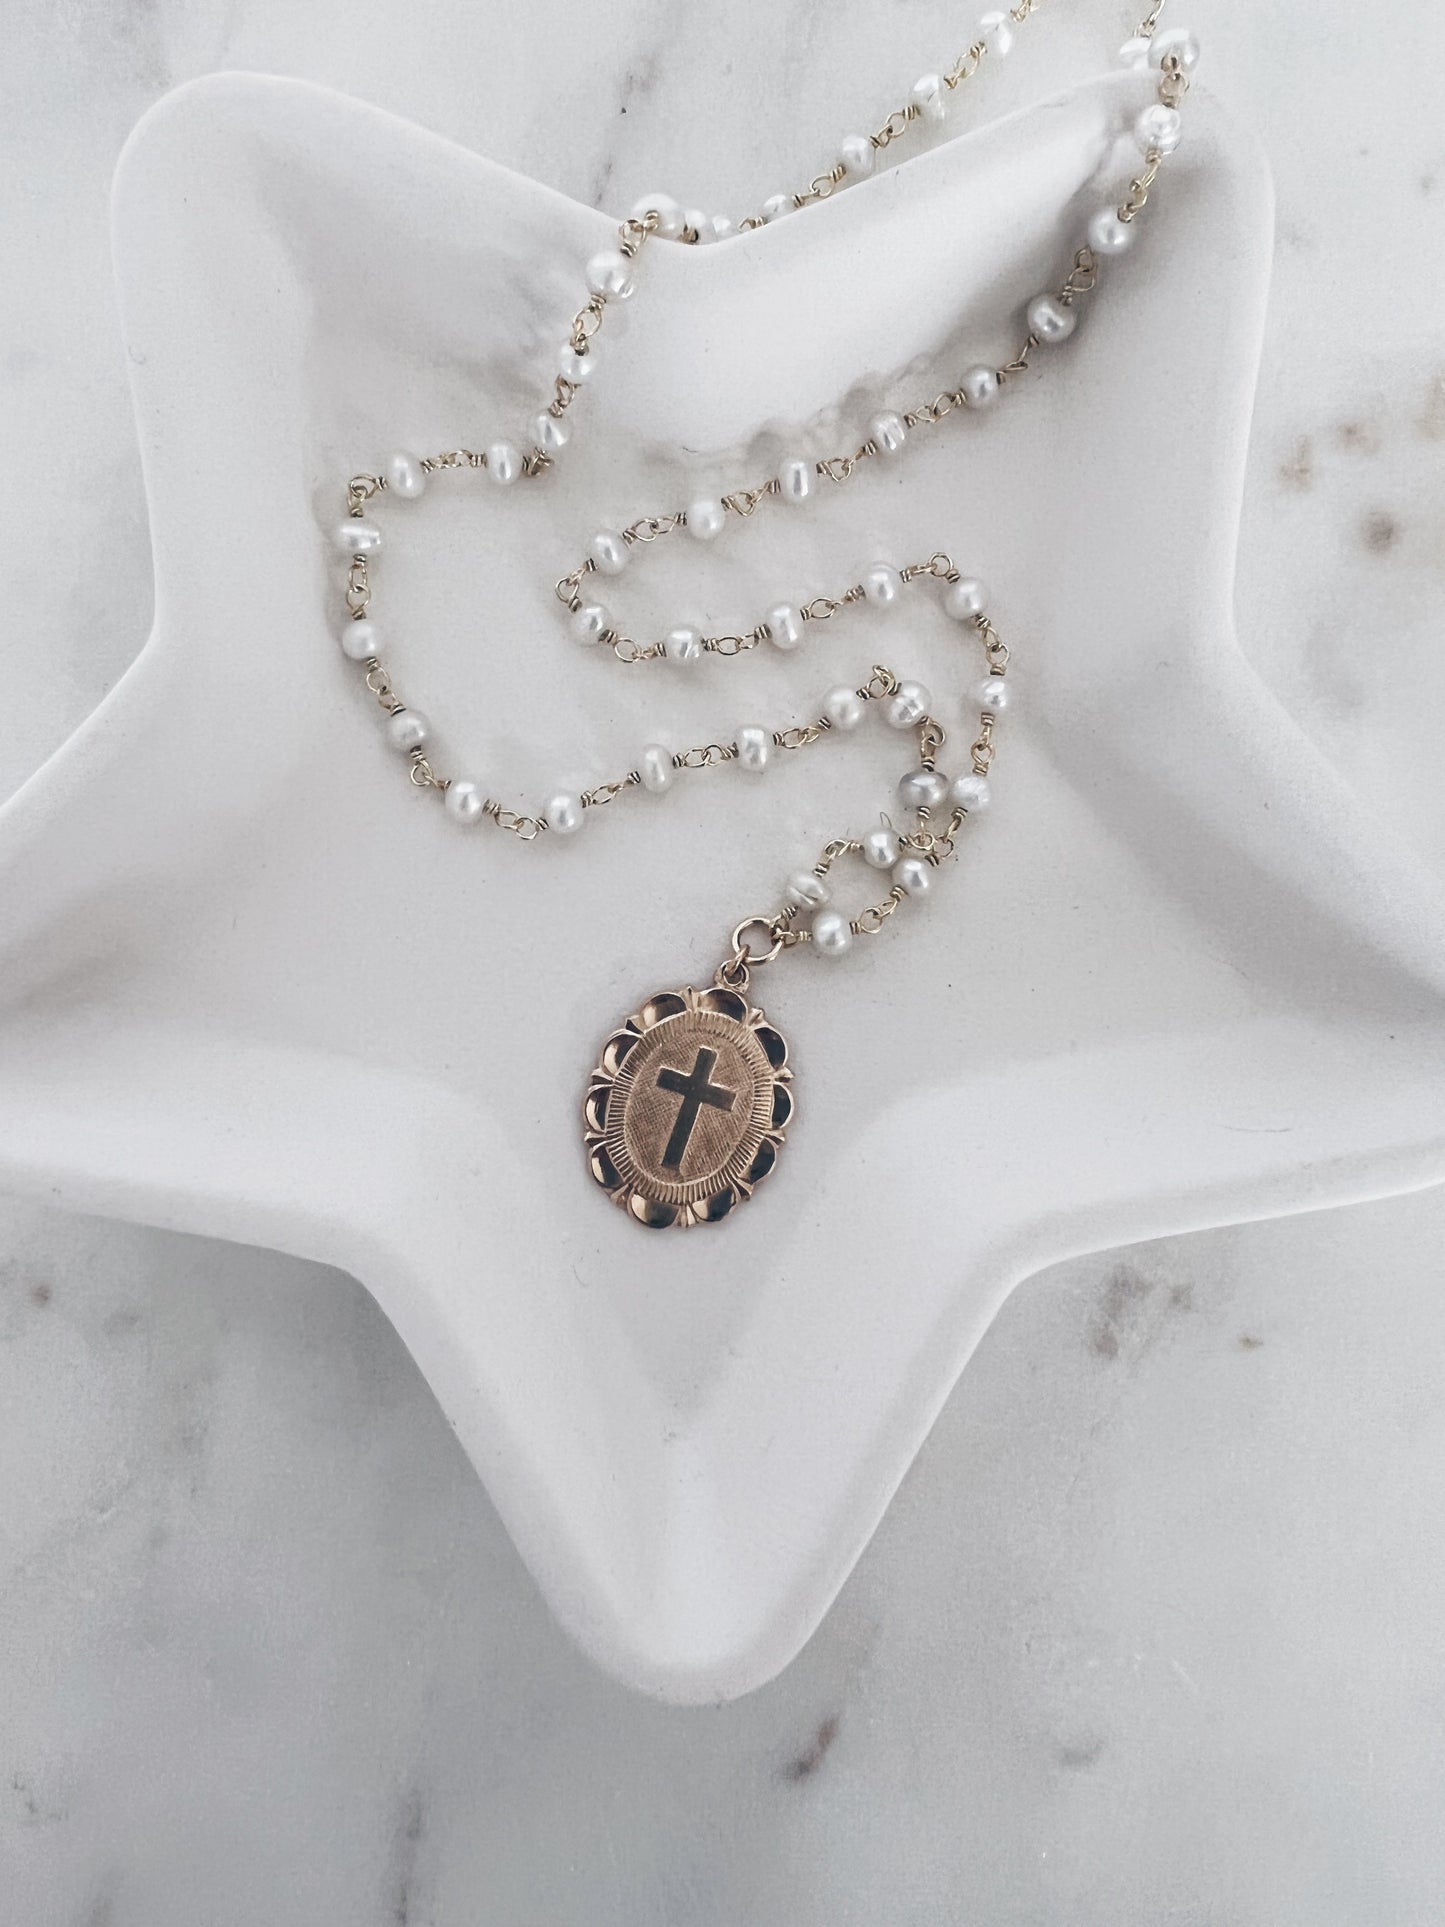 Rosary Gemstone Cross Coin Necklace + More Options